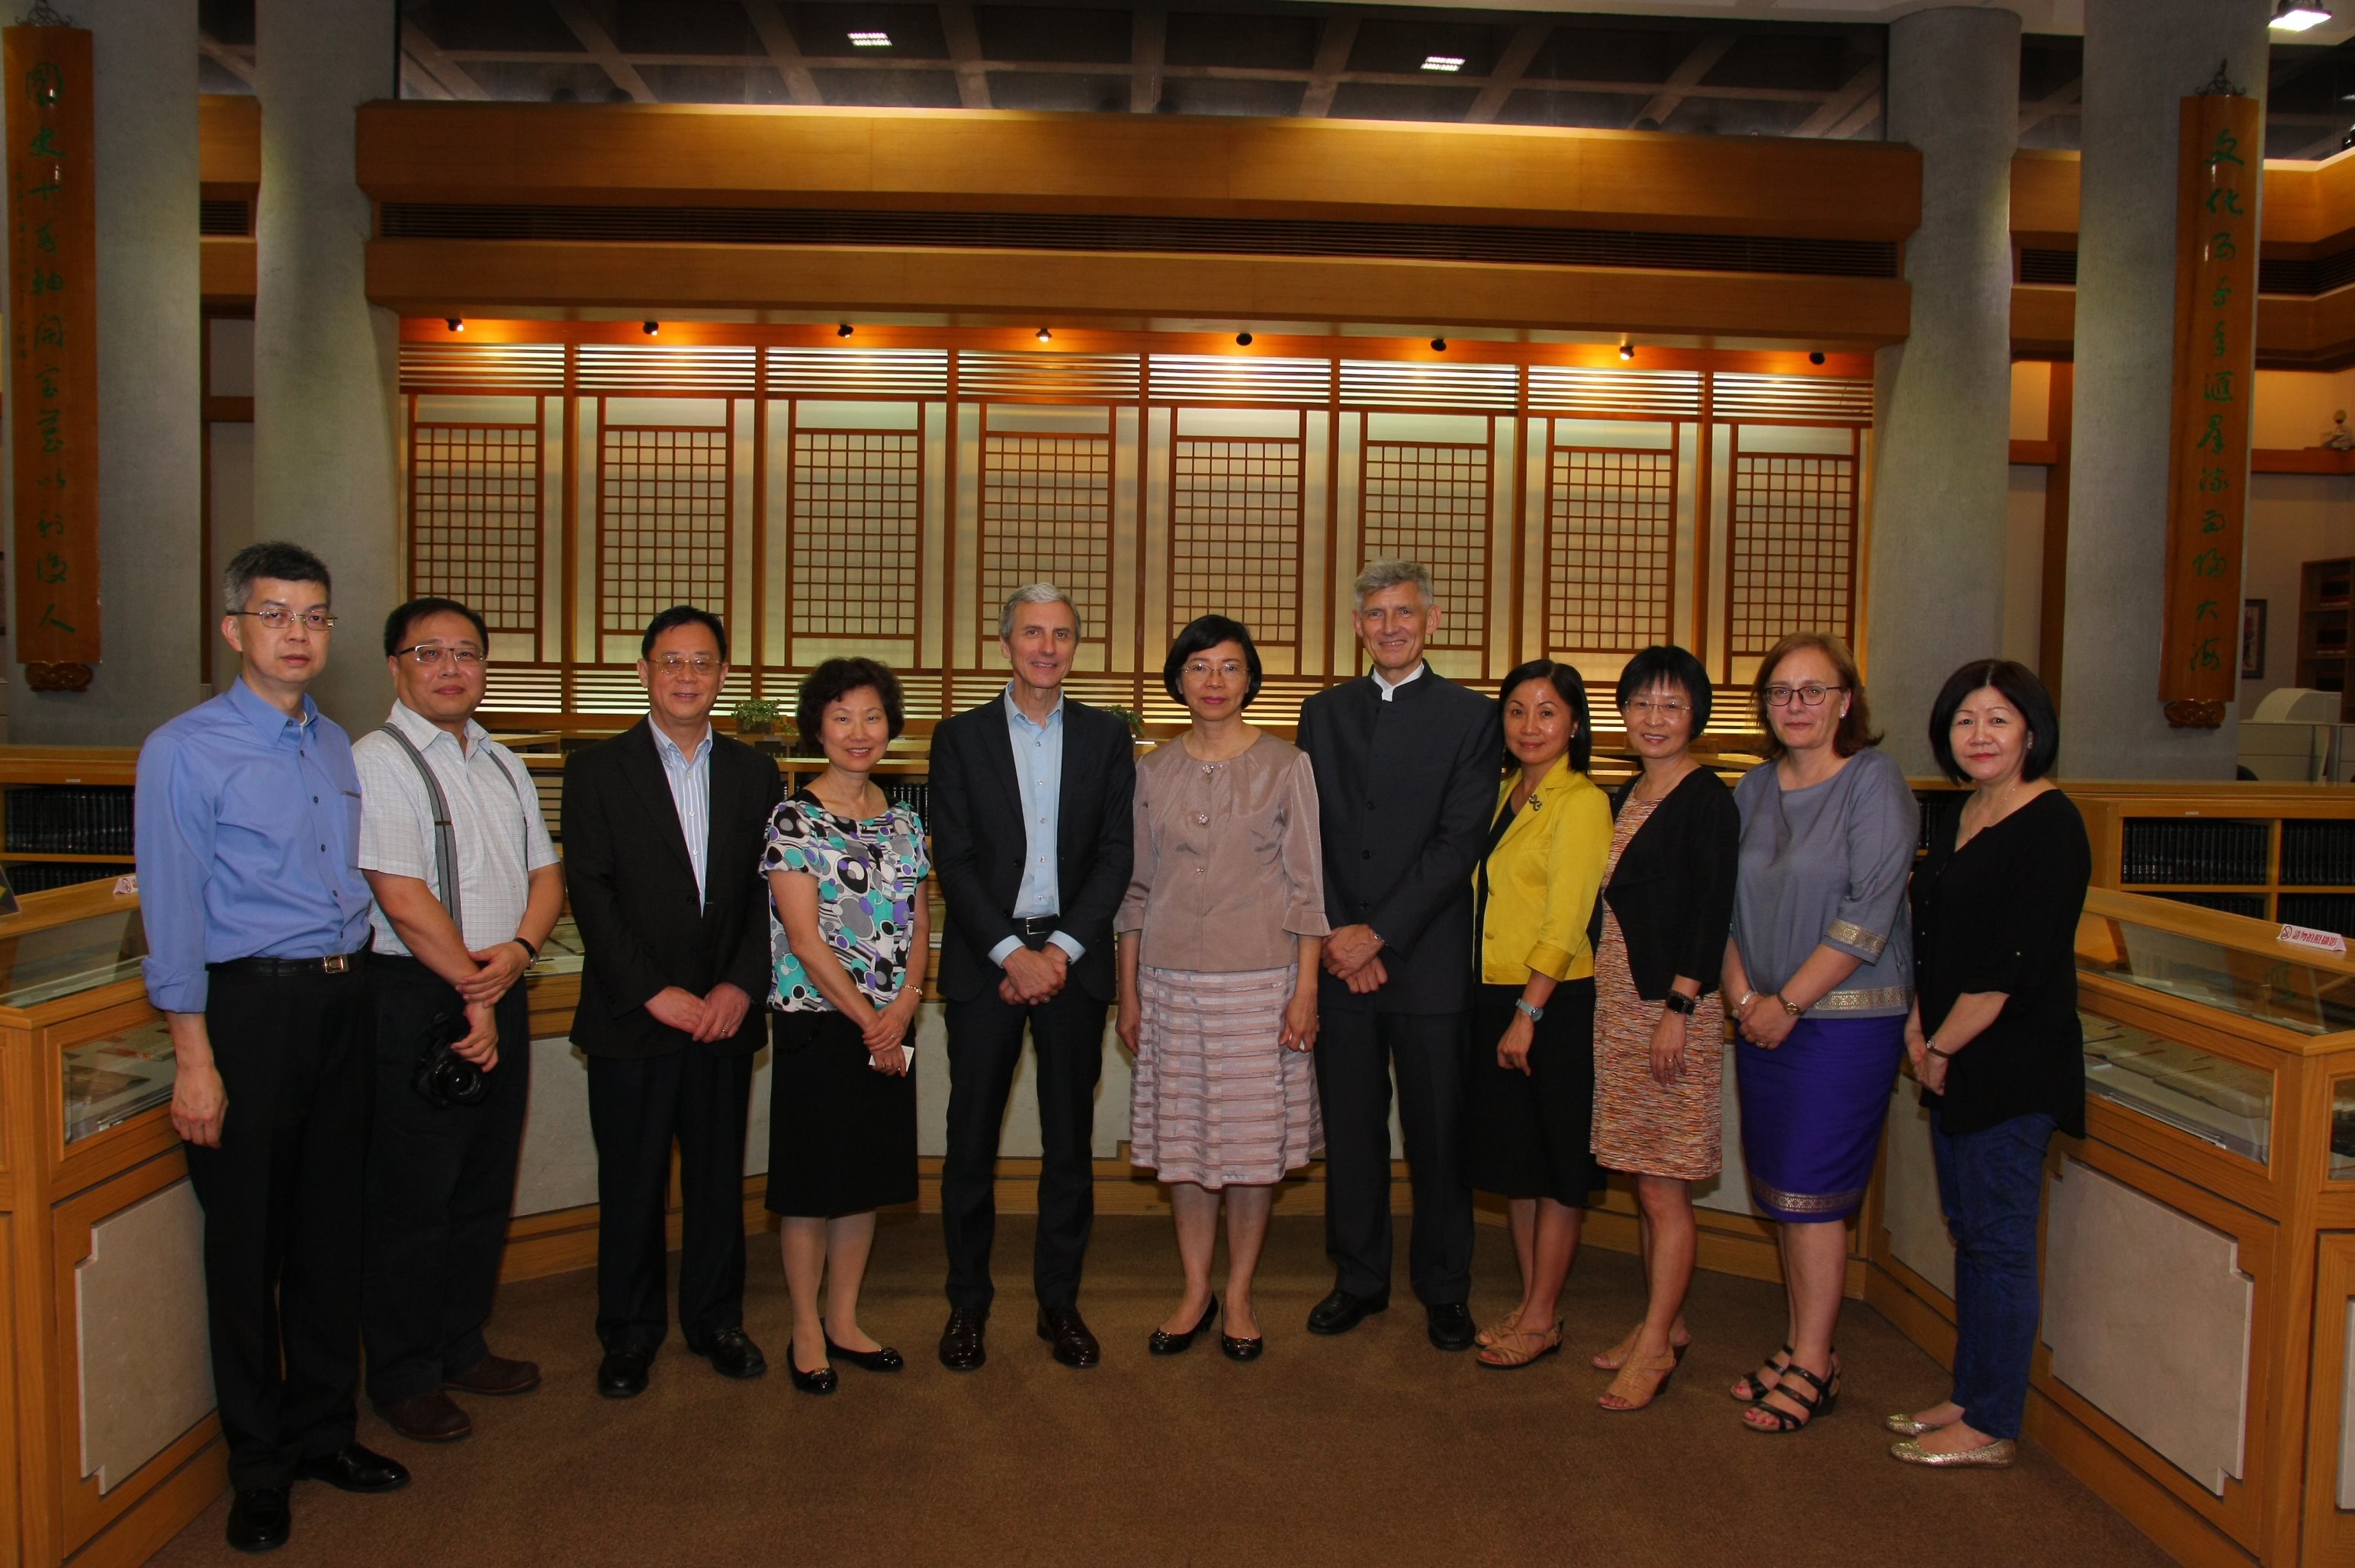 2015.06.04 The president of JULAC (Joint University Librarians Advisory Committee), Mr. Peter Sidorko, together with nine other librarians from the different universities in Hong Kong, came to visit the NCL